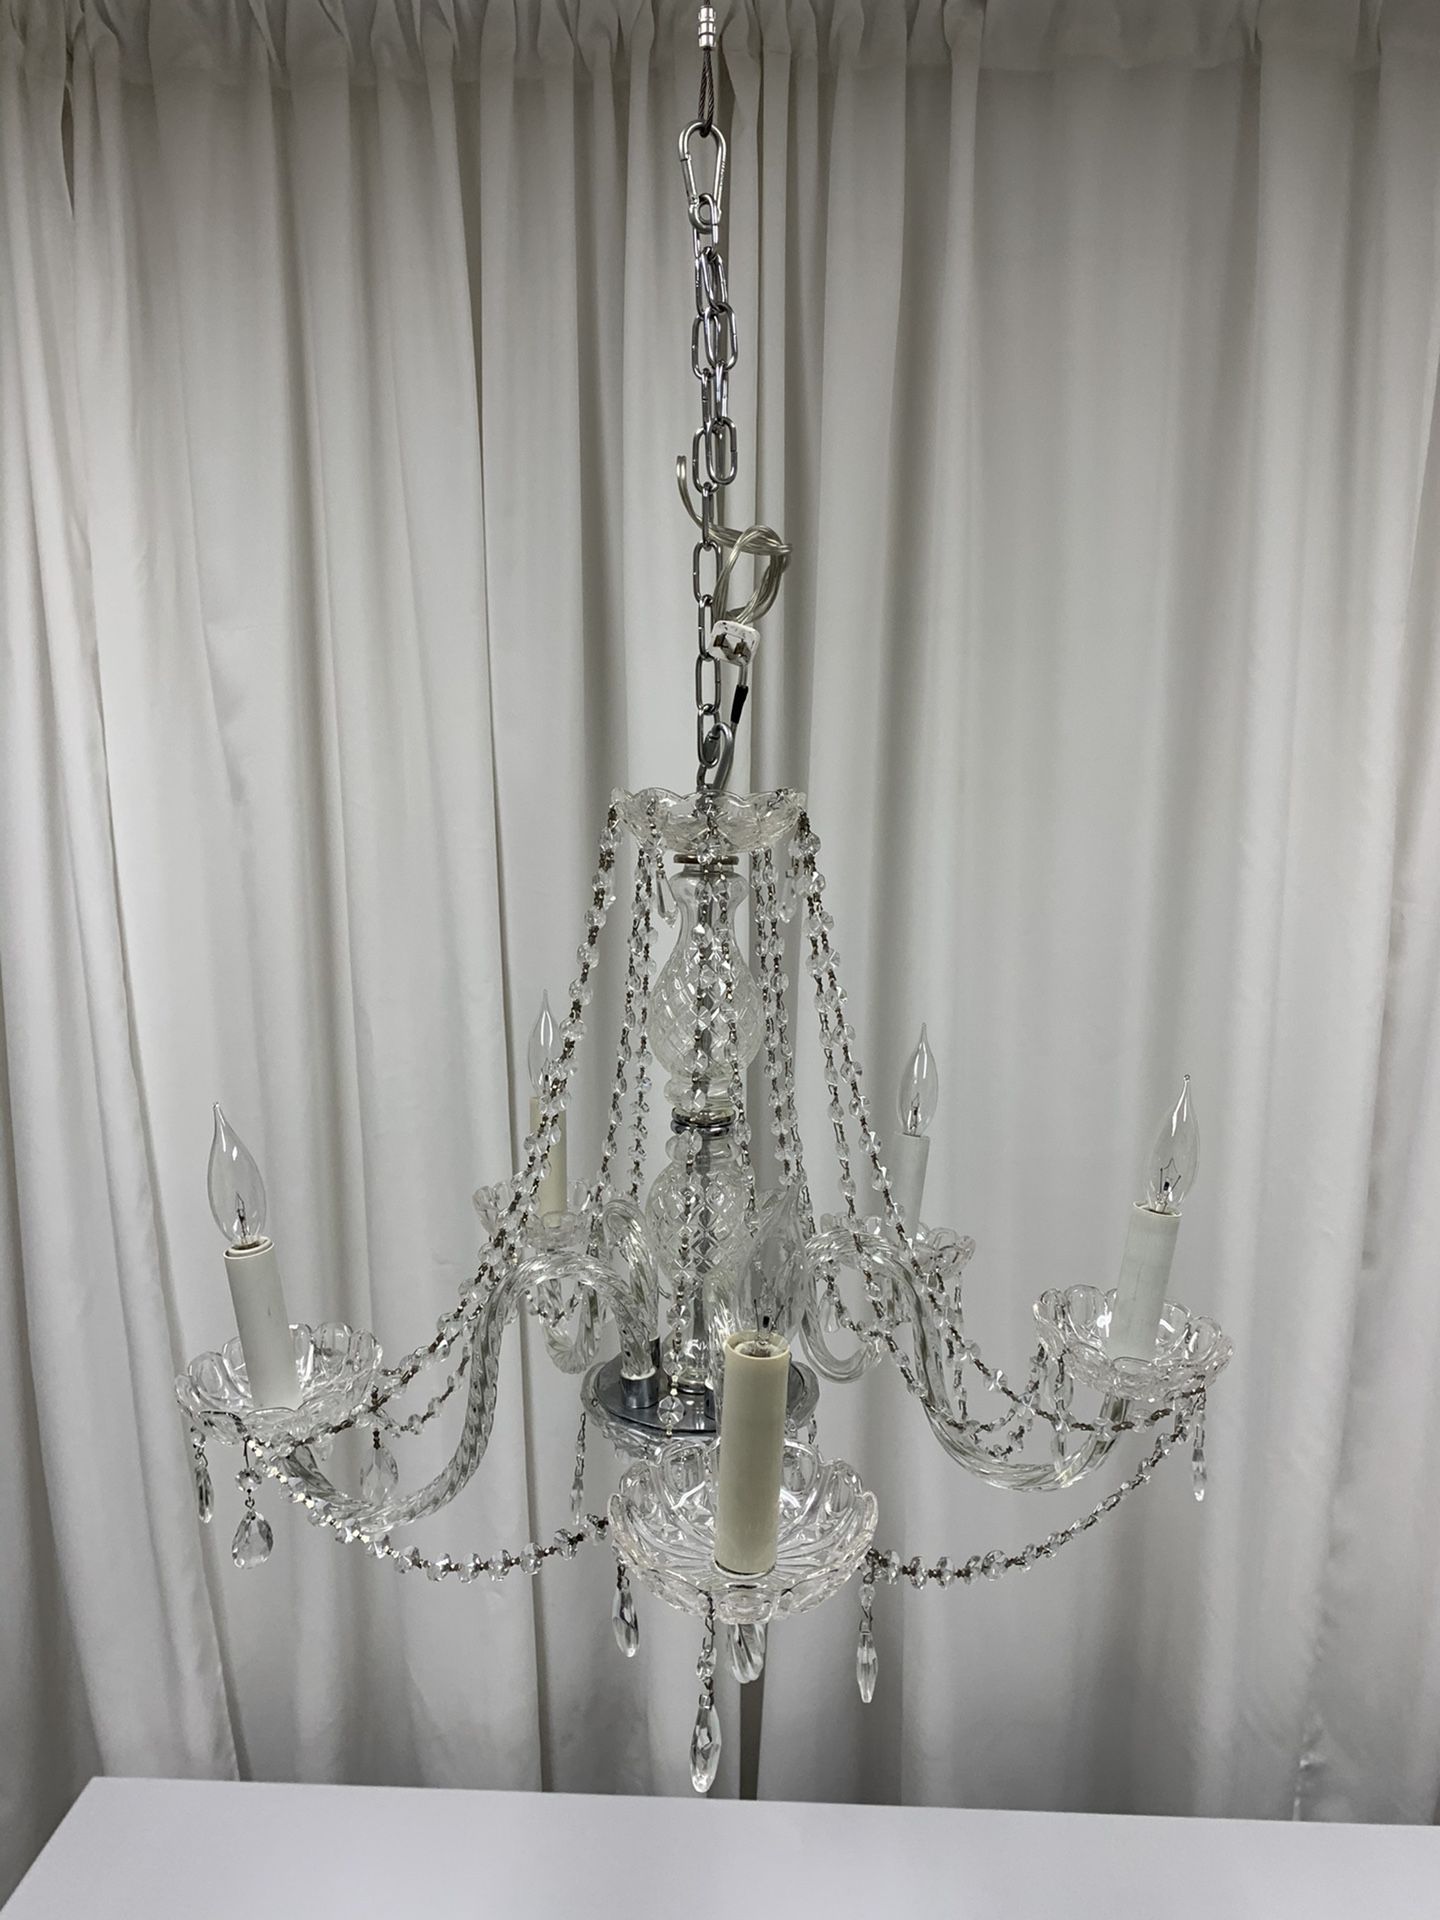 5 Arms Crystal Glass Light Chandelier 25” H x 24” W Venetian Style